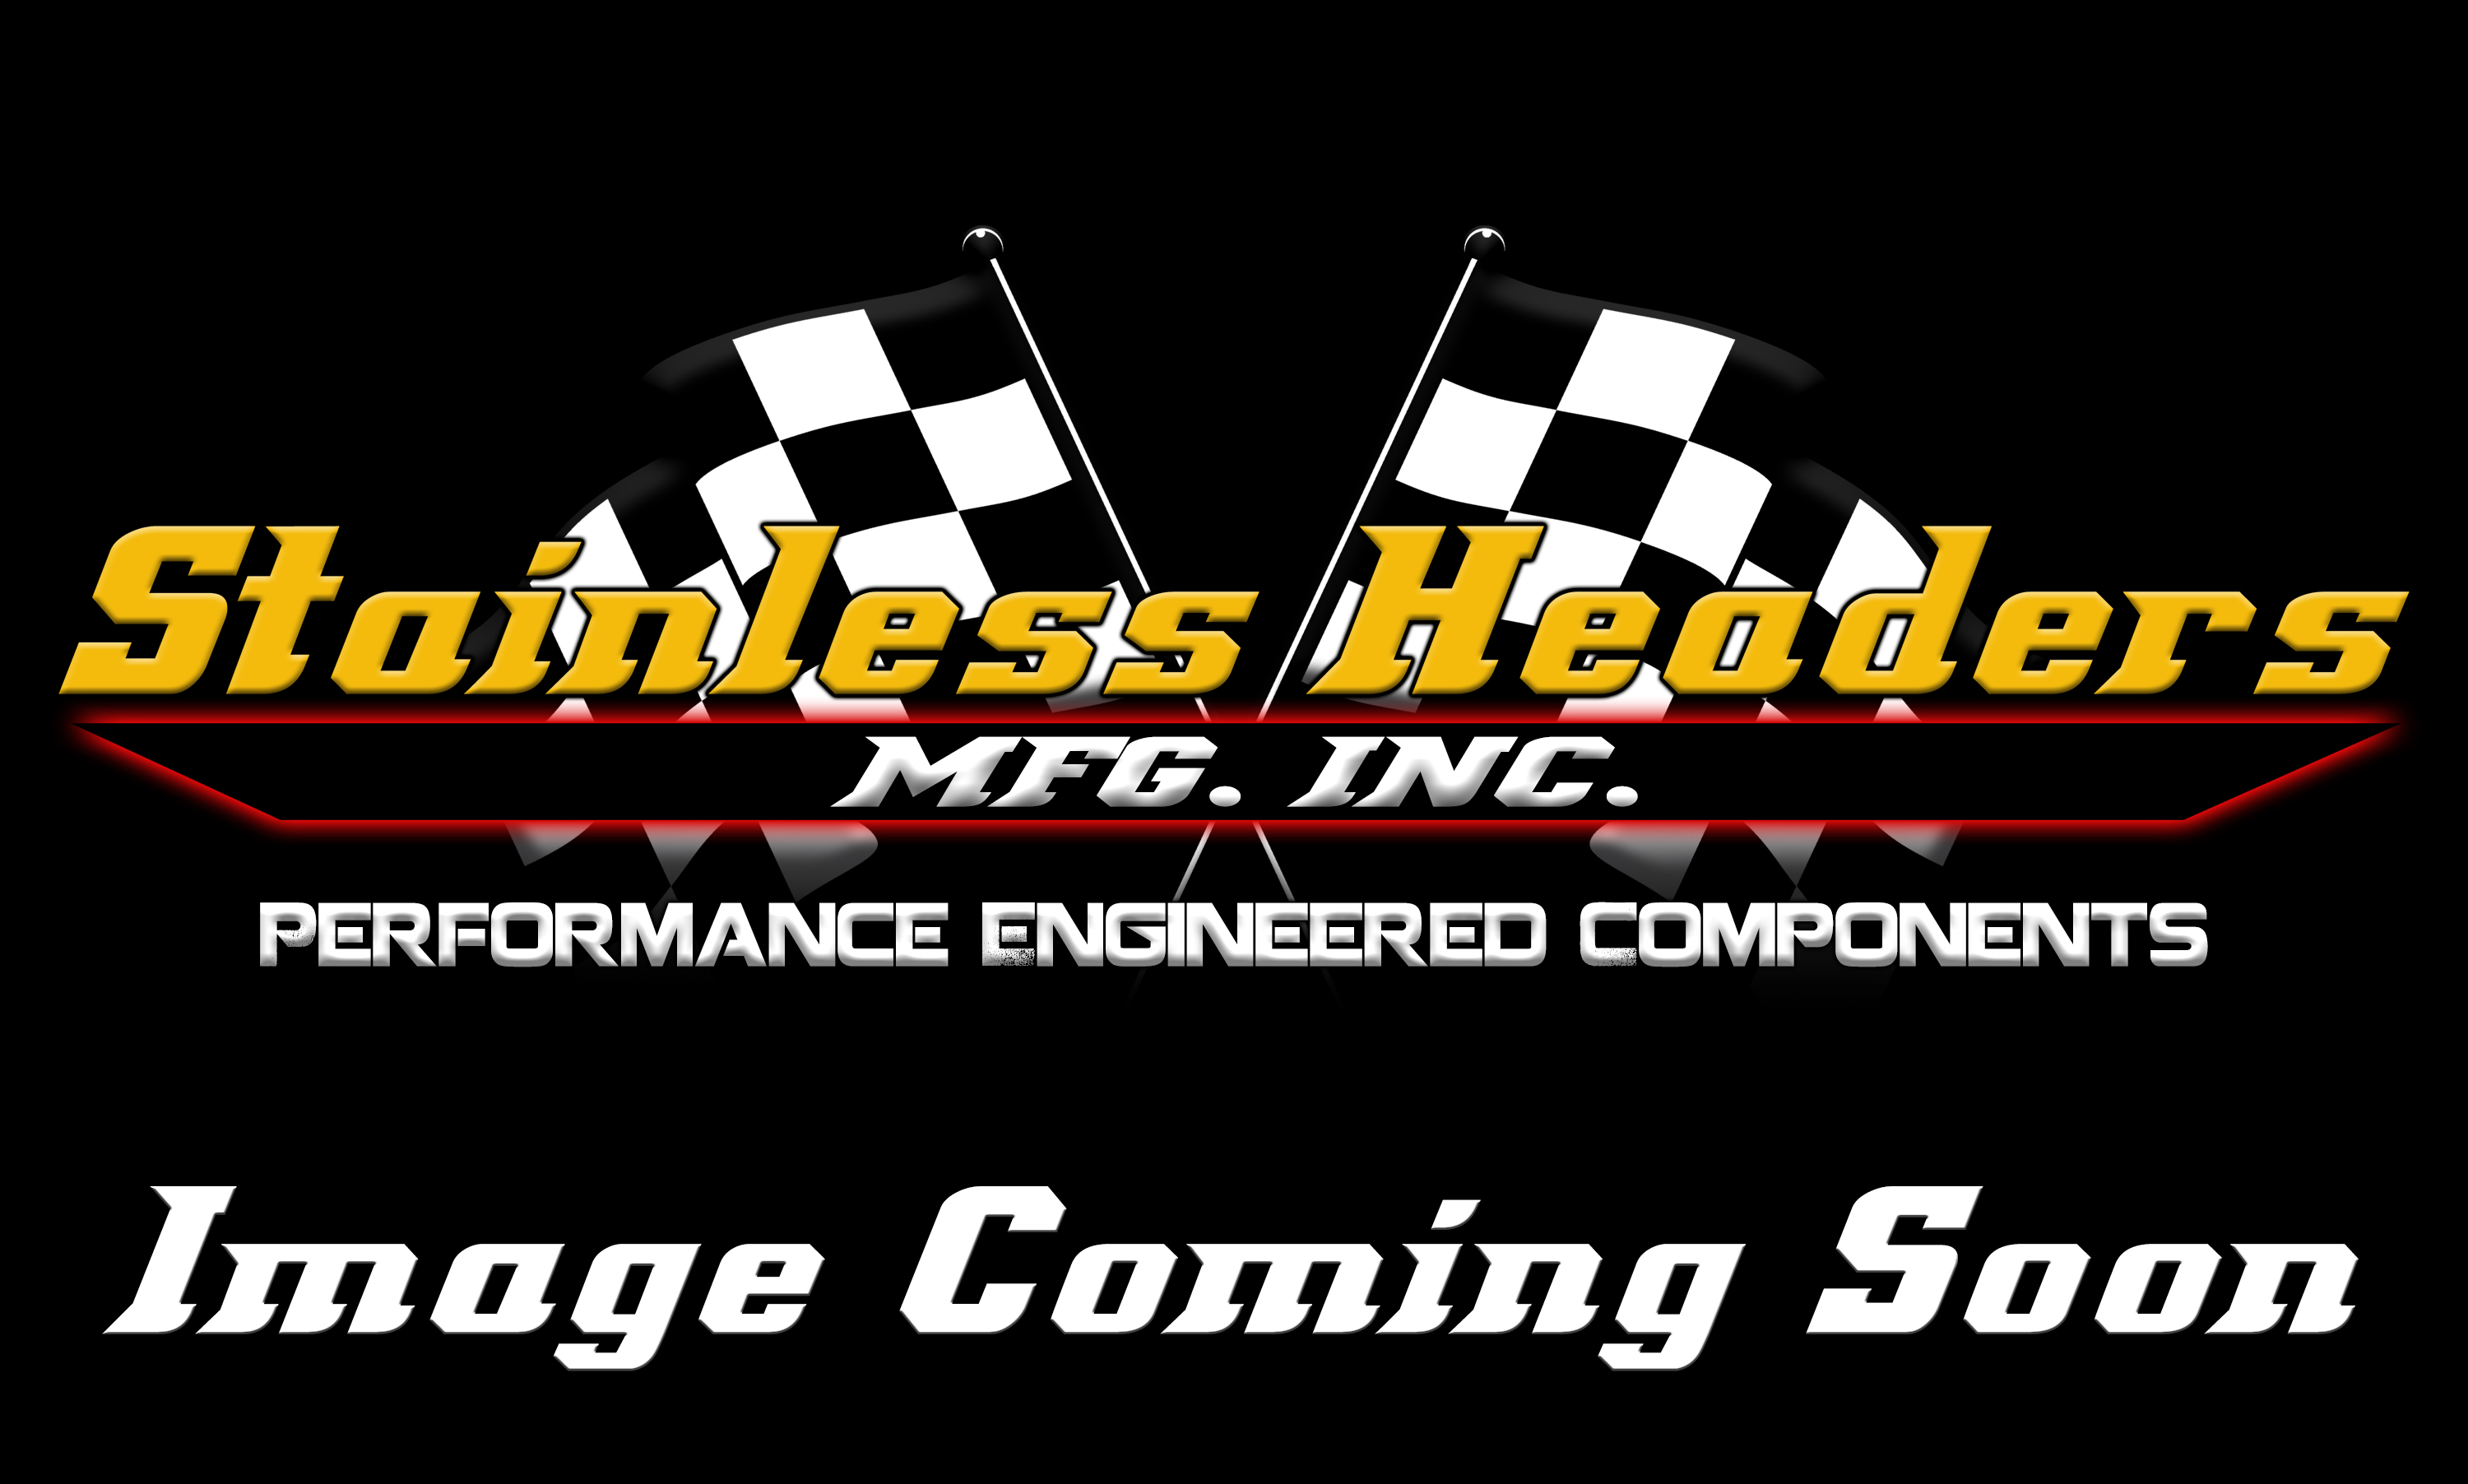 CompTurbo Technologies - CTR4202R-7485 Mid Frame Oil-Less 3.0 Turbocharger (1300 HP) - Image 1